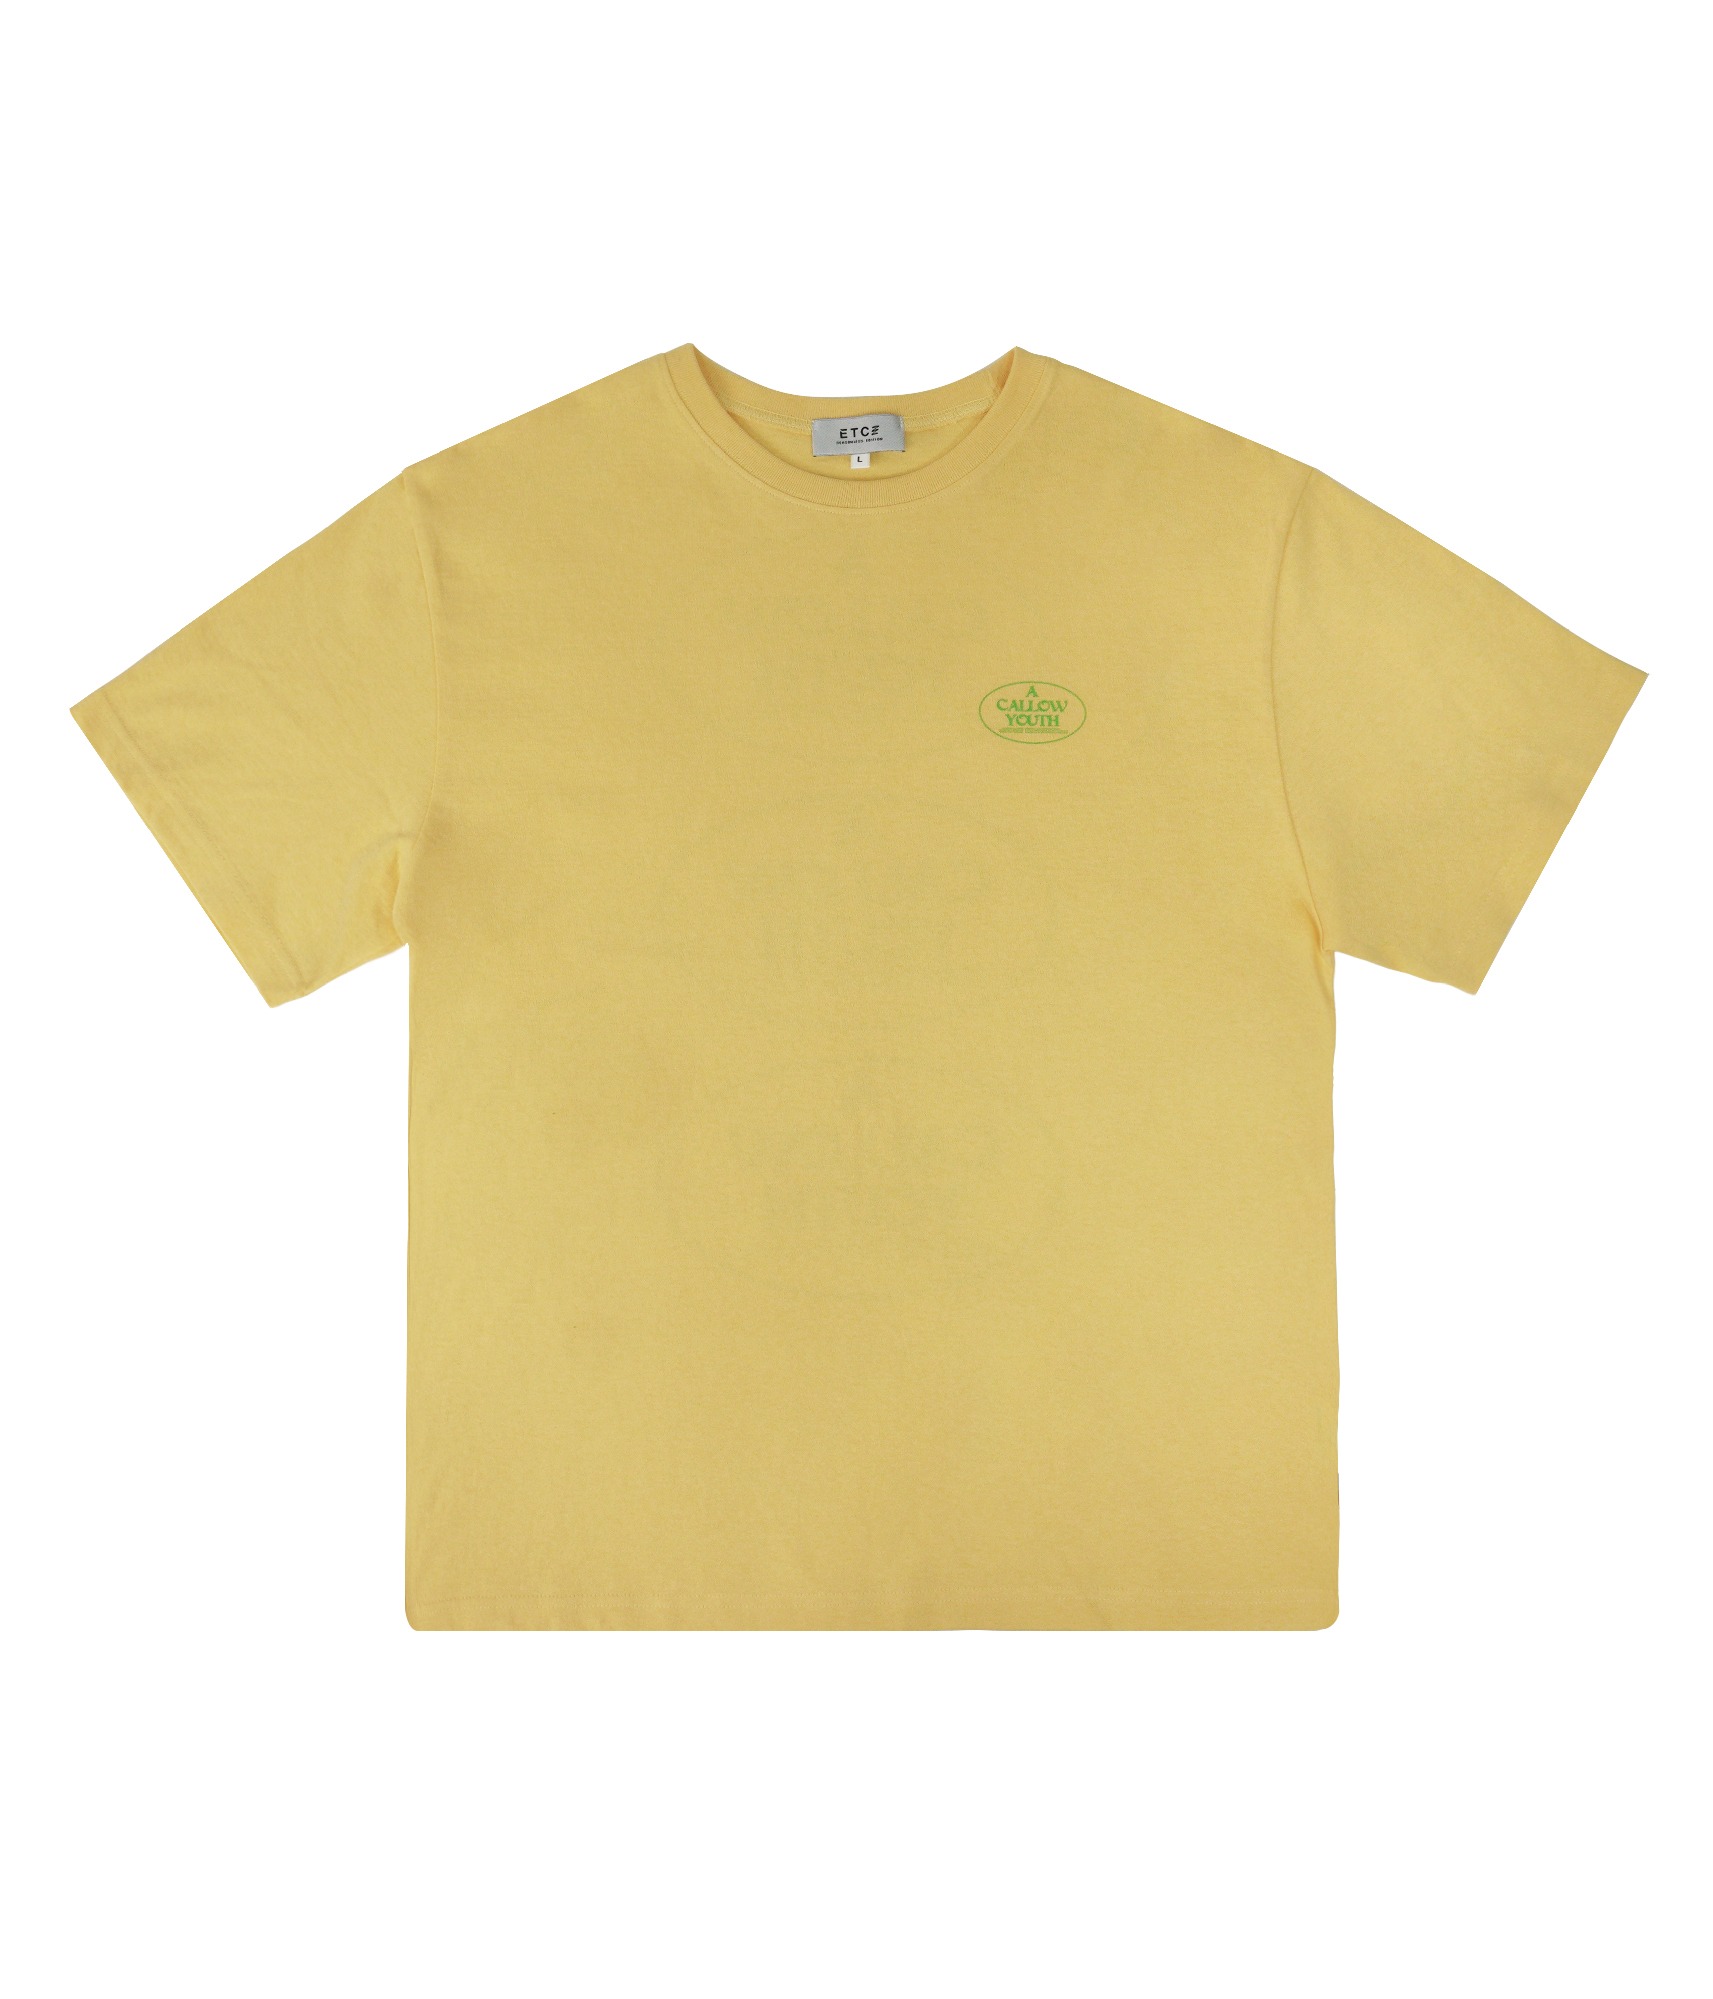 A CALLOW YOUTH TEE (YELLOW)